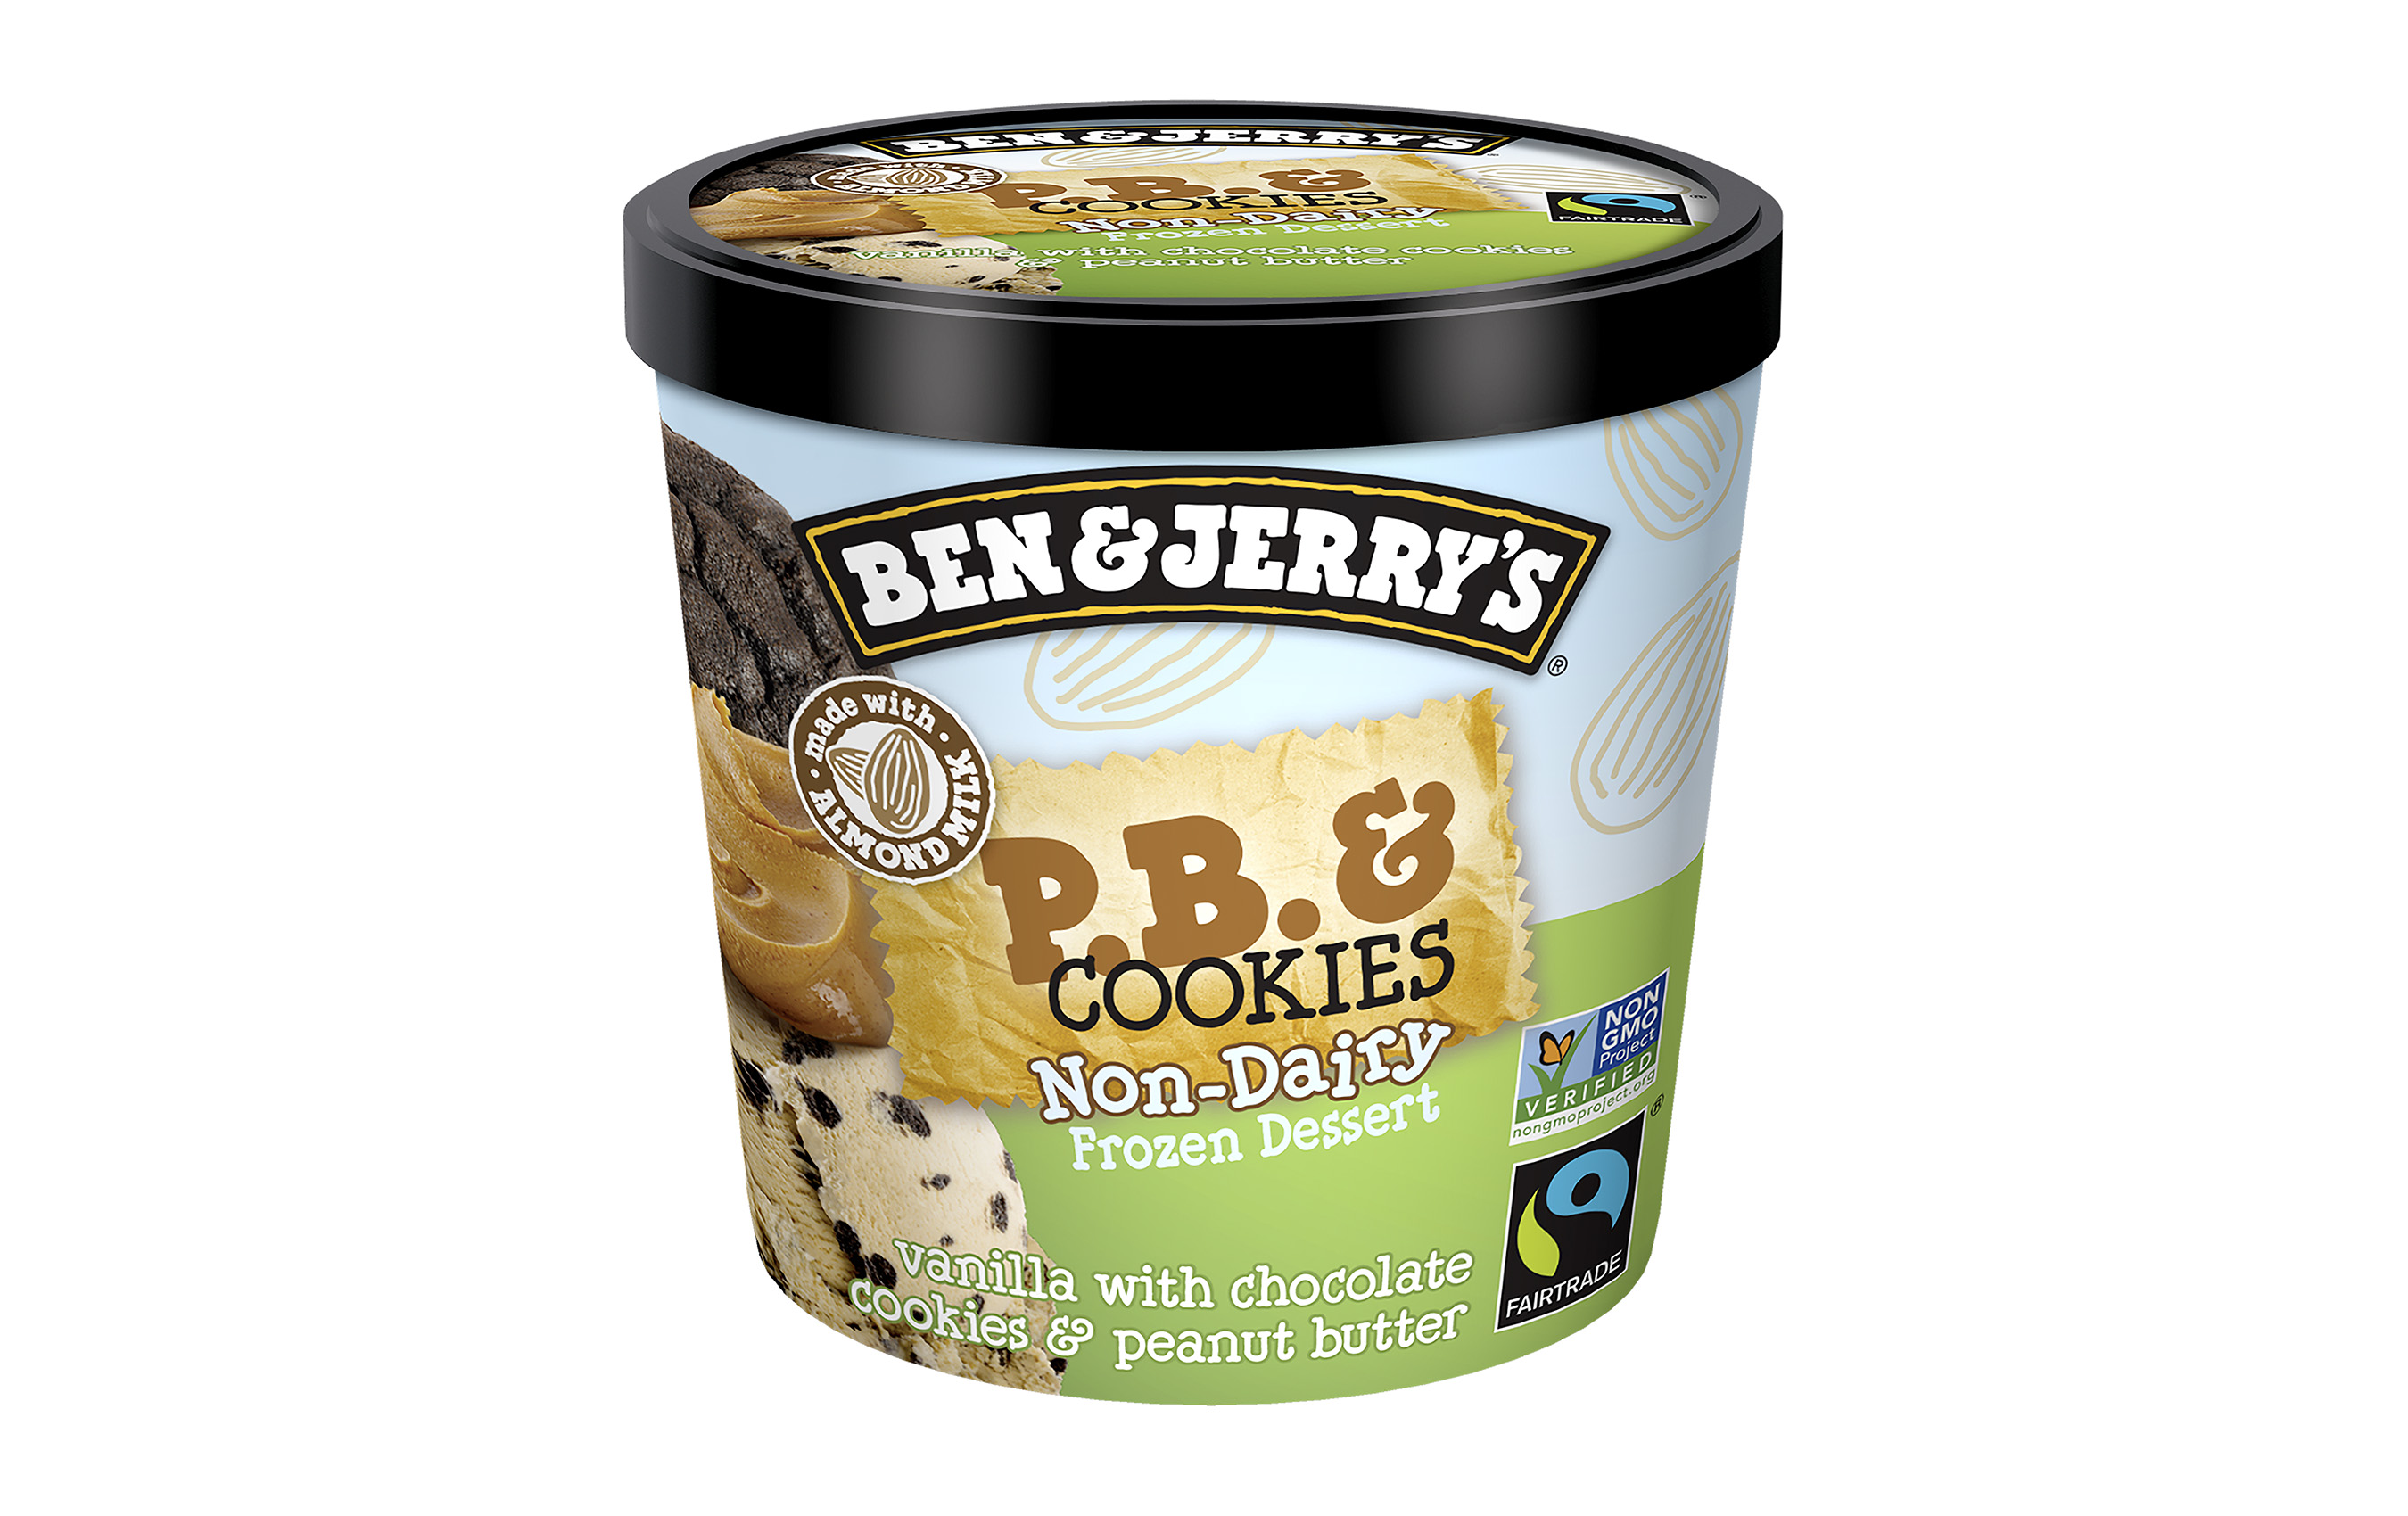 Ben & Jerry’s P.B. & Cookies Mini Cup features vanilla non-dairy frozen dessert with chocolate cookies & peanut butter in a portion control cup that’s great on the go.